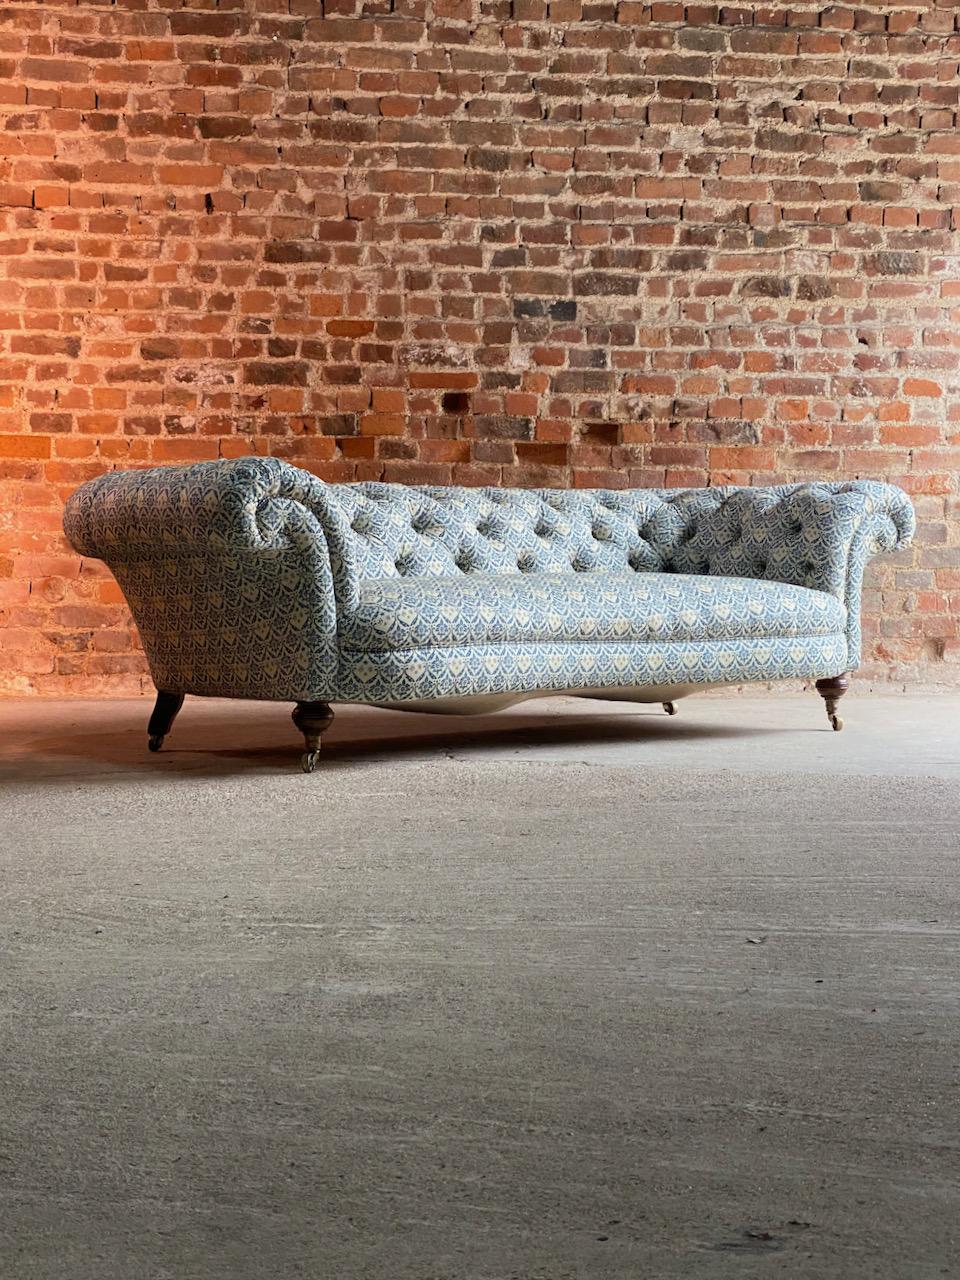 Victorian Howard and Sons Chesterfield Sofa, 19th Century, circa 1850